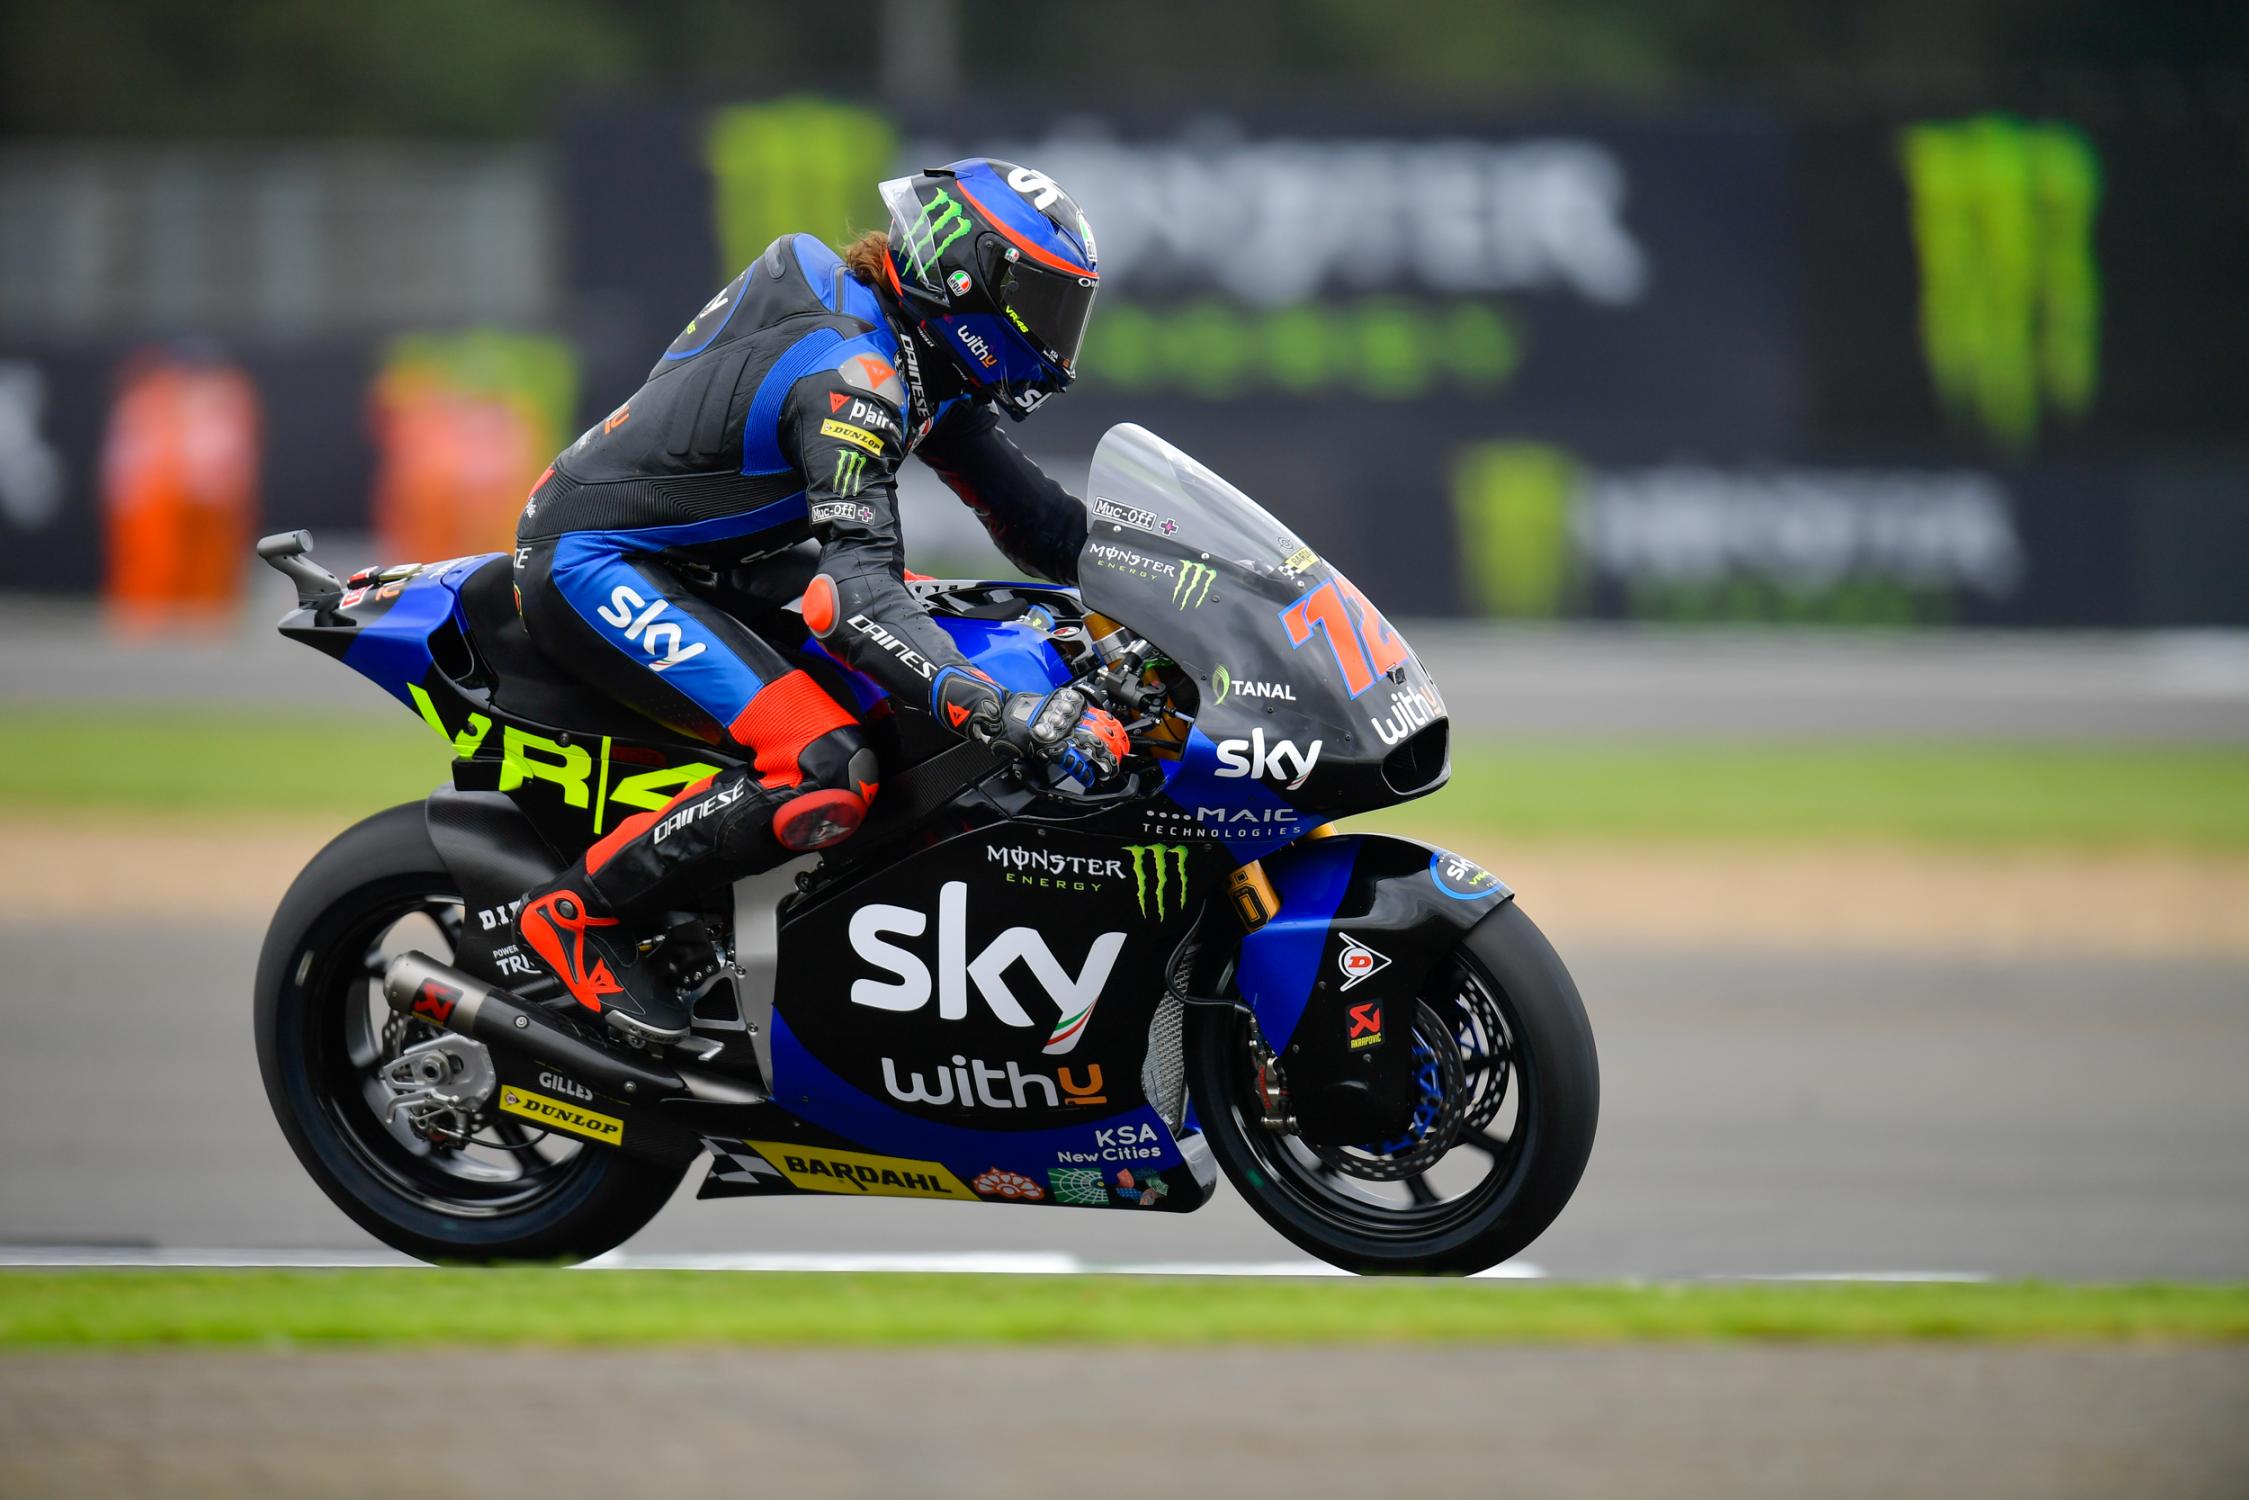 Moto2 Silverstone Qualifying: Marco Bezzecchi, on the move, snatches pole and the track record